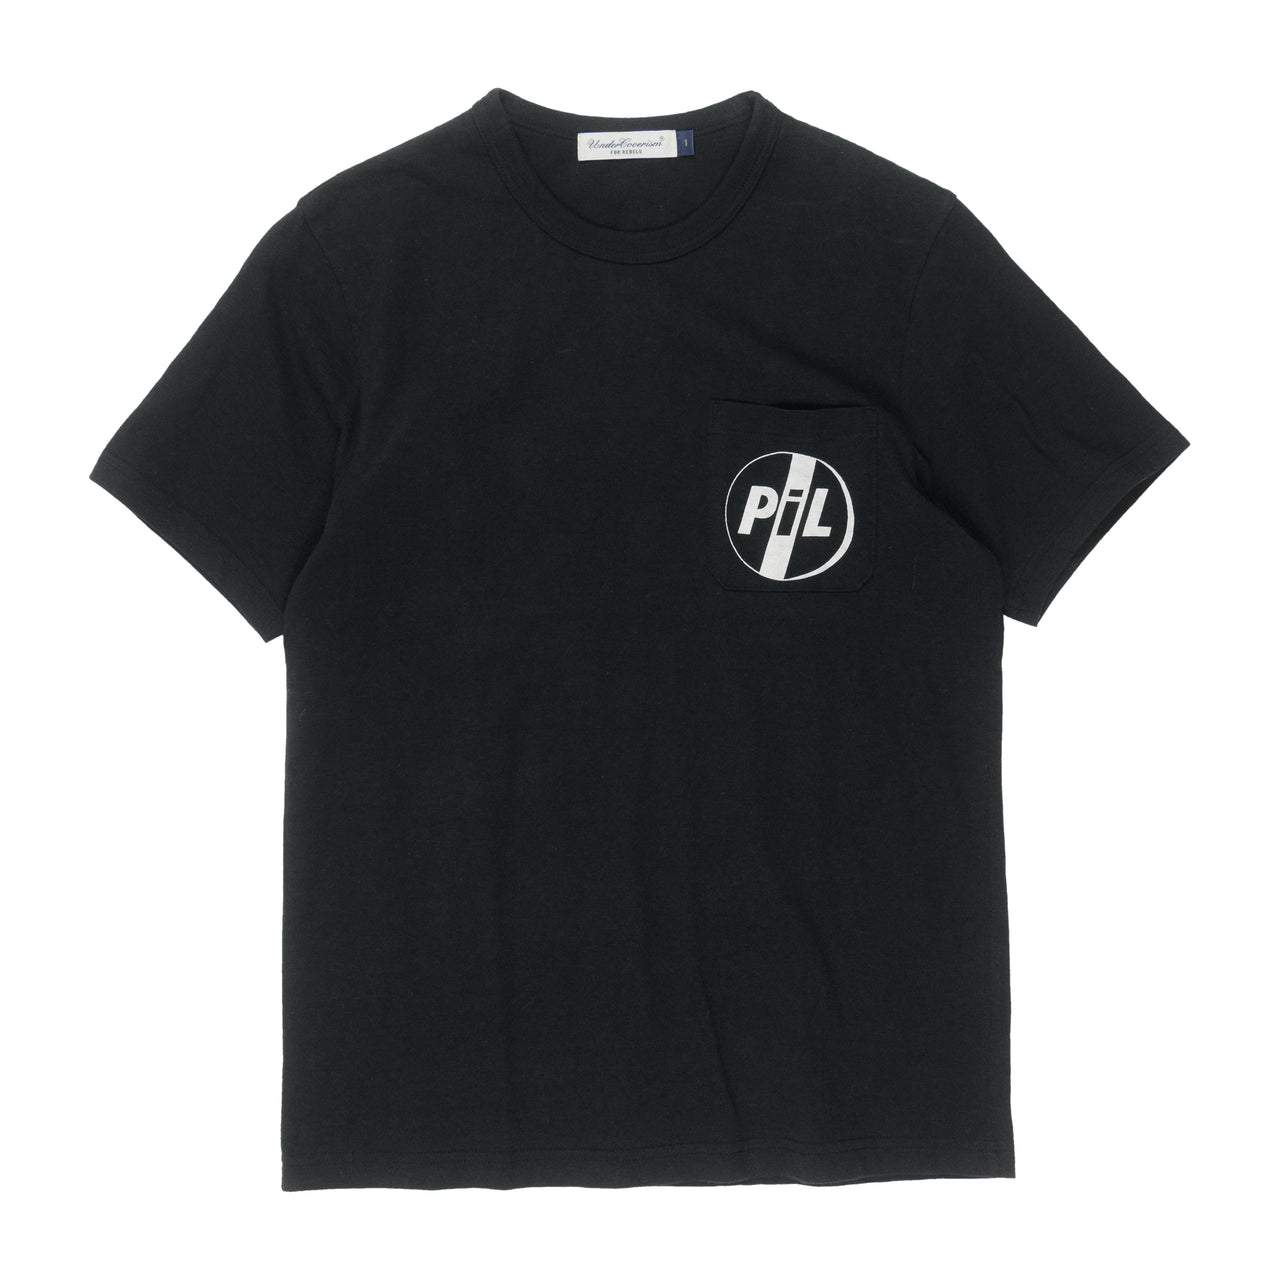 Undercover "Pil" Pocket Tee